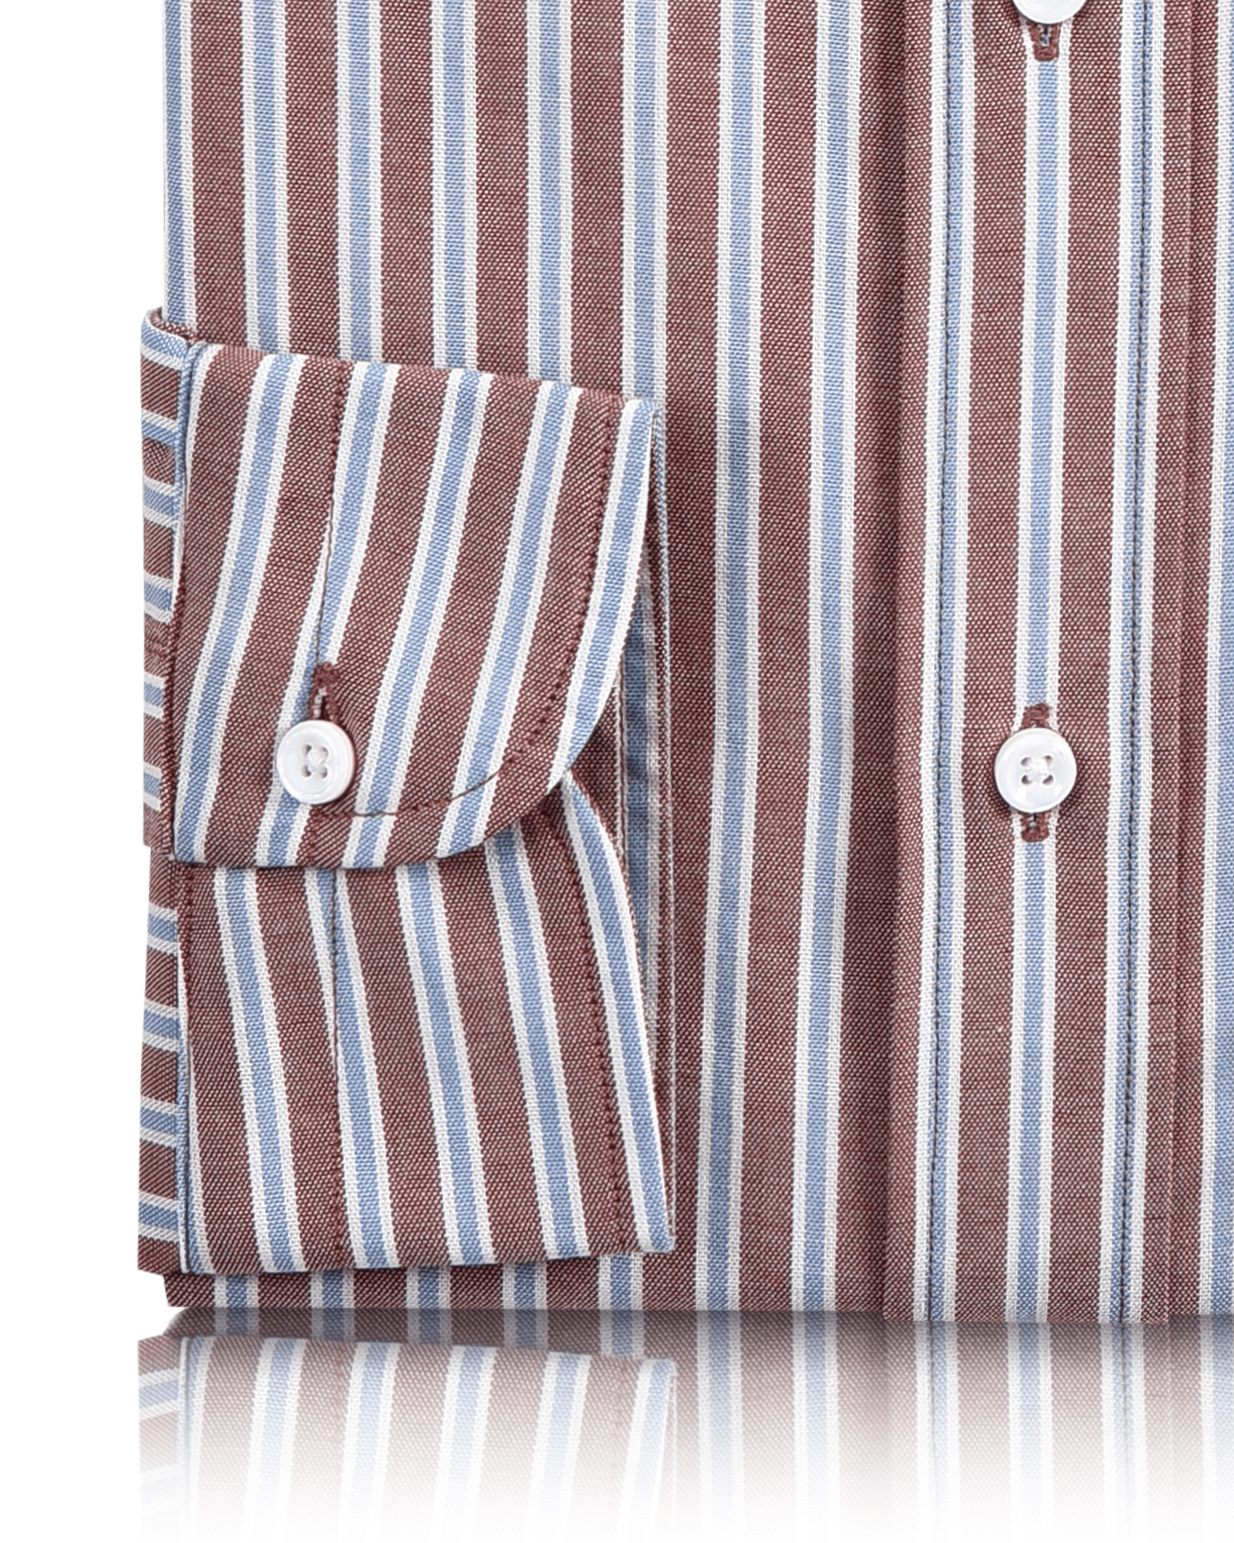 Cuff of the custom oxford shirt for men by Luxire with blue white and rust stripes